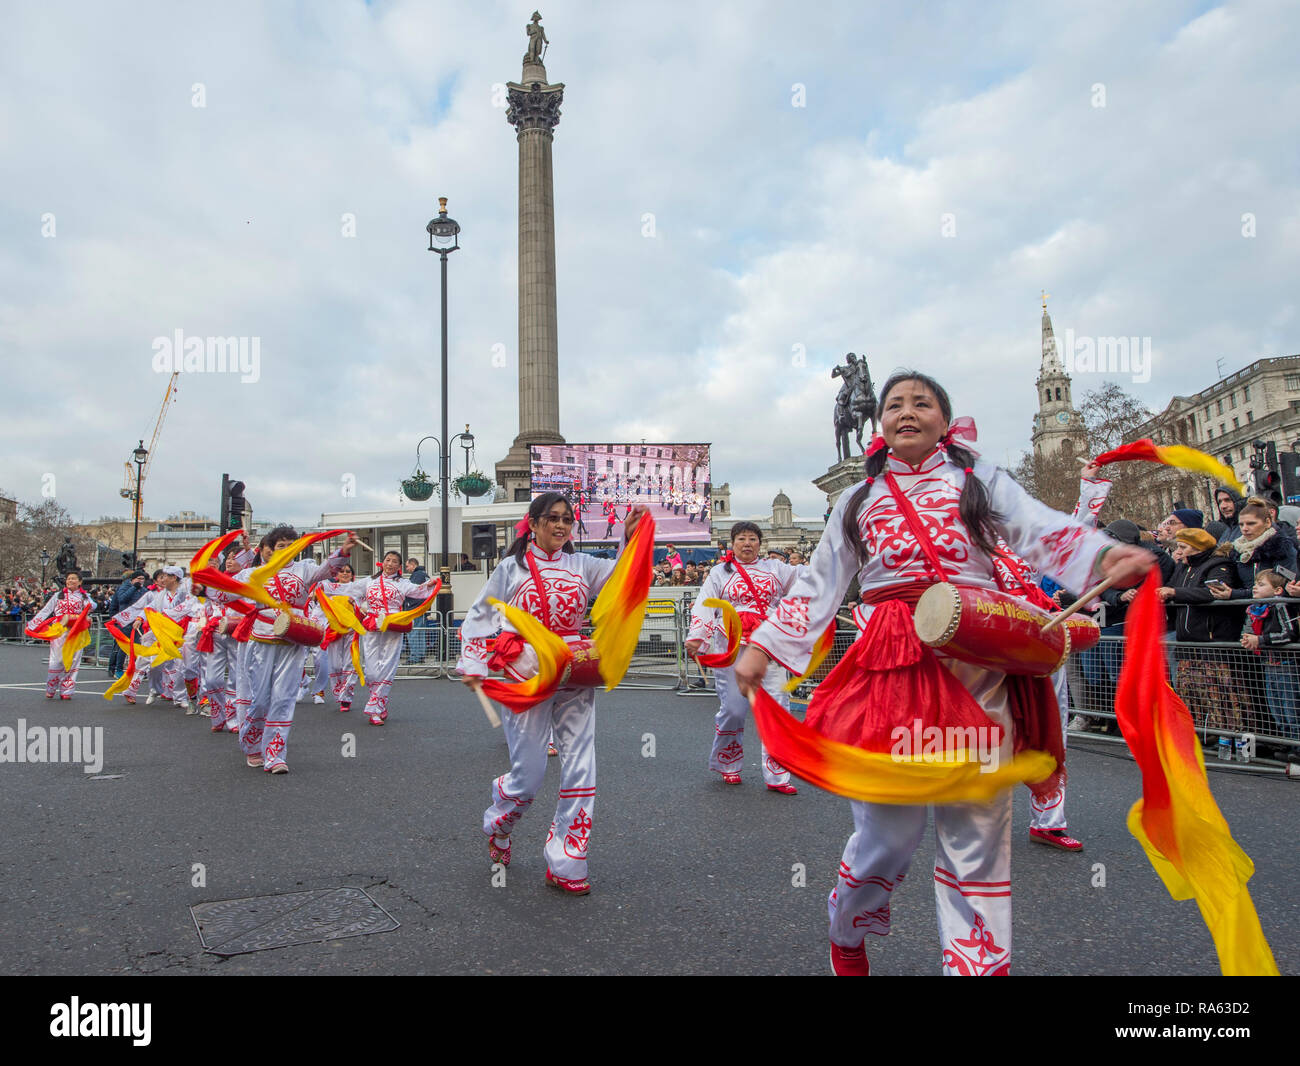 2019 London New Years Day Parade on 1st January, from Piccadilly to Whitehall in central London, UK. Credit: Malcolm Park/Alamy. Stock Photo